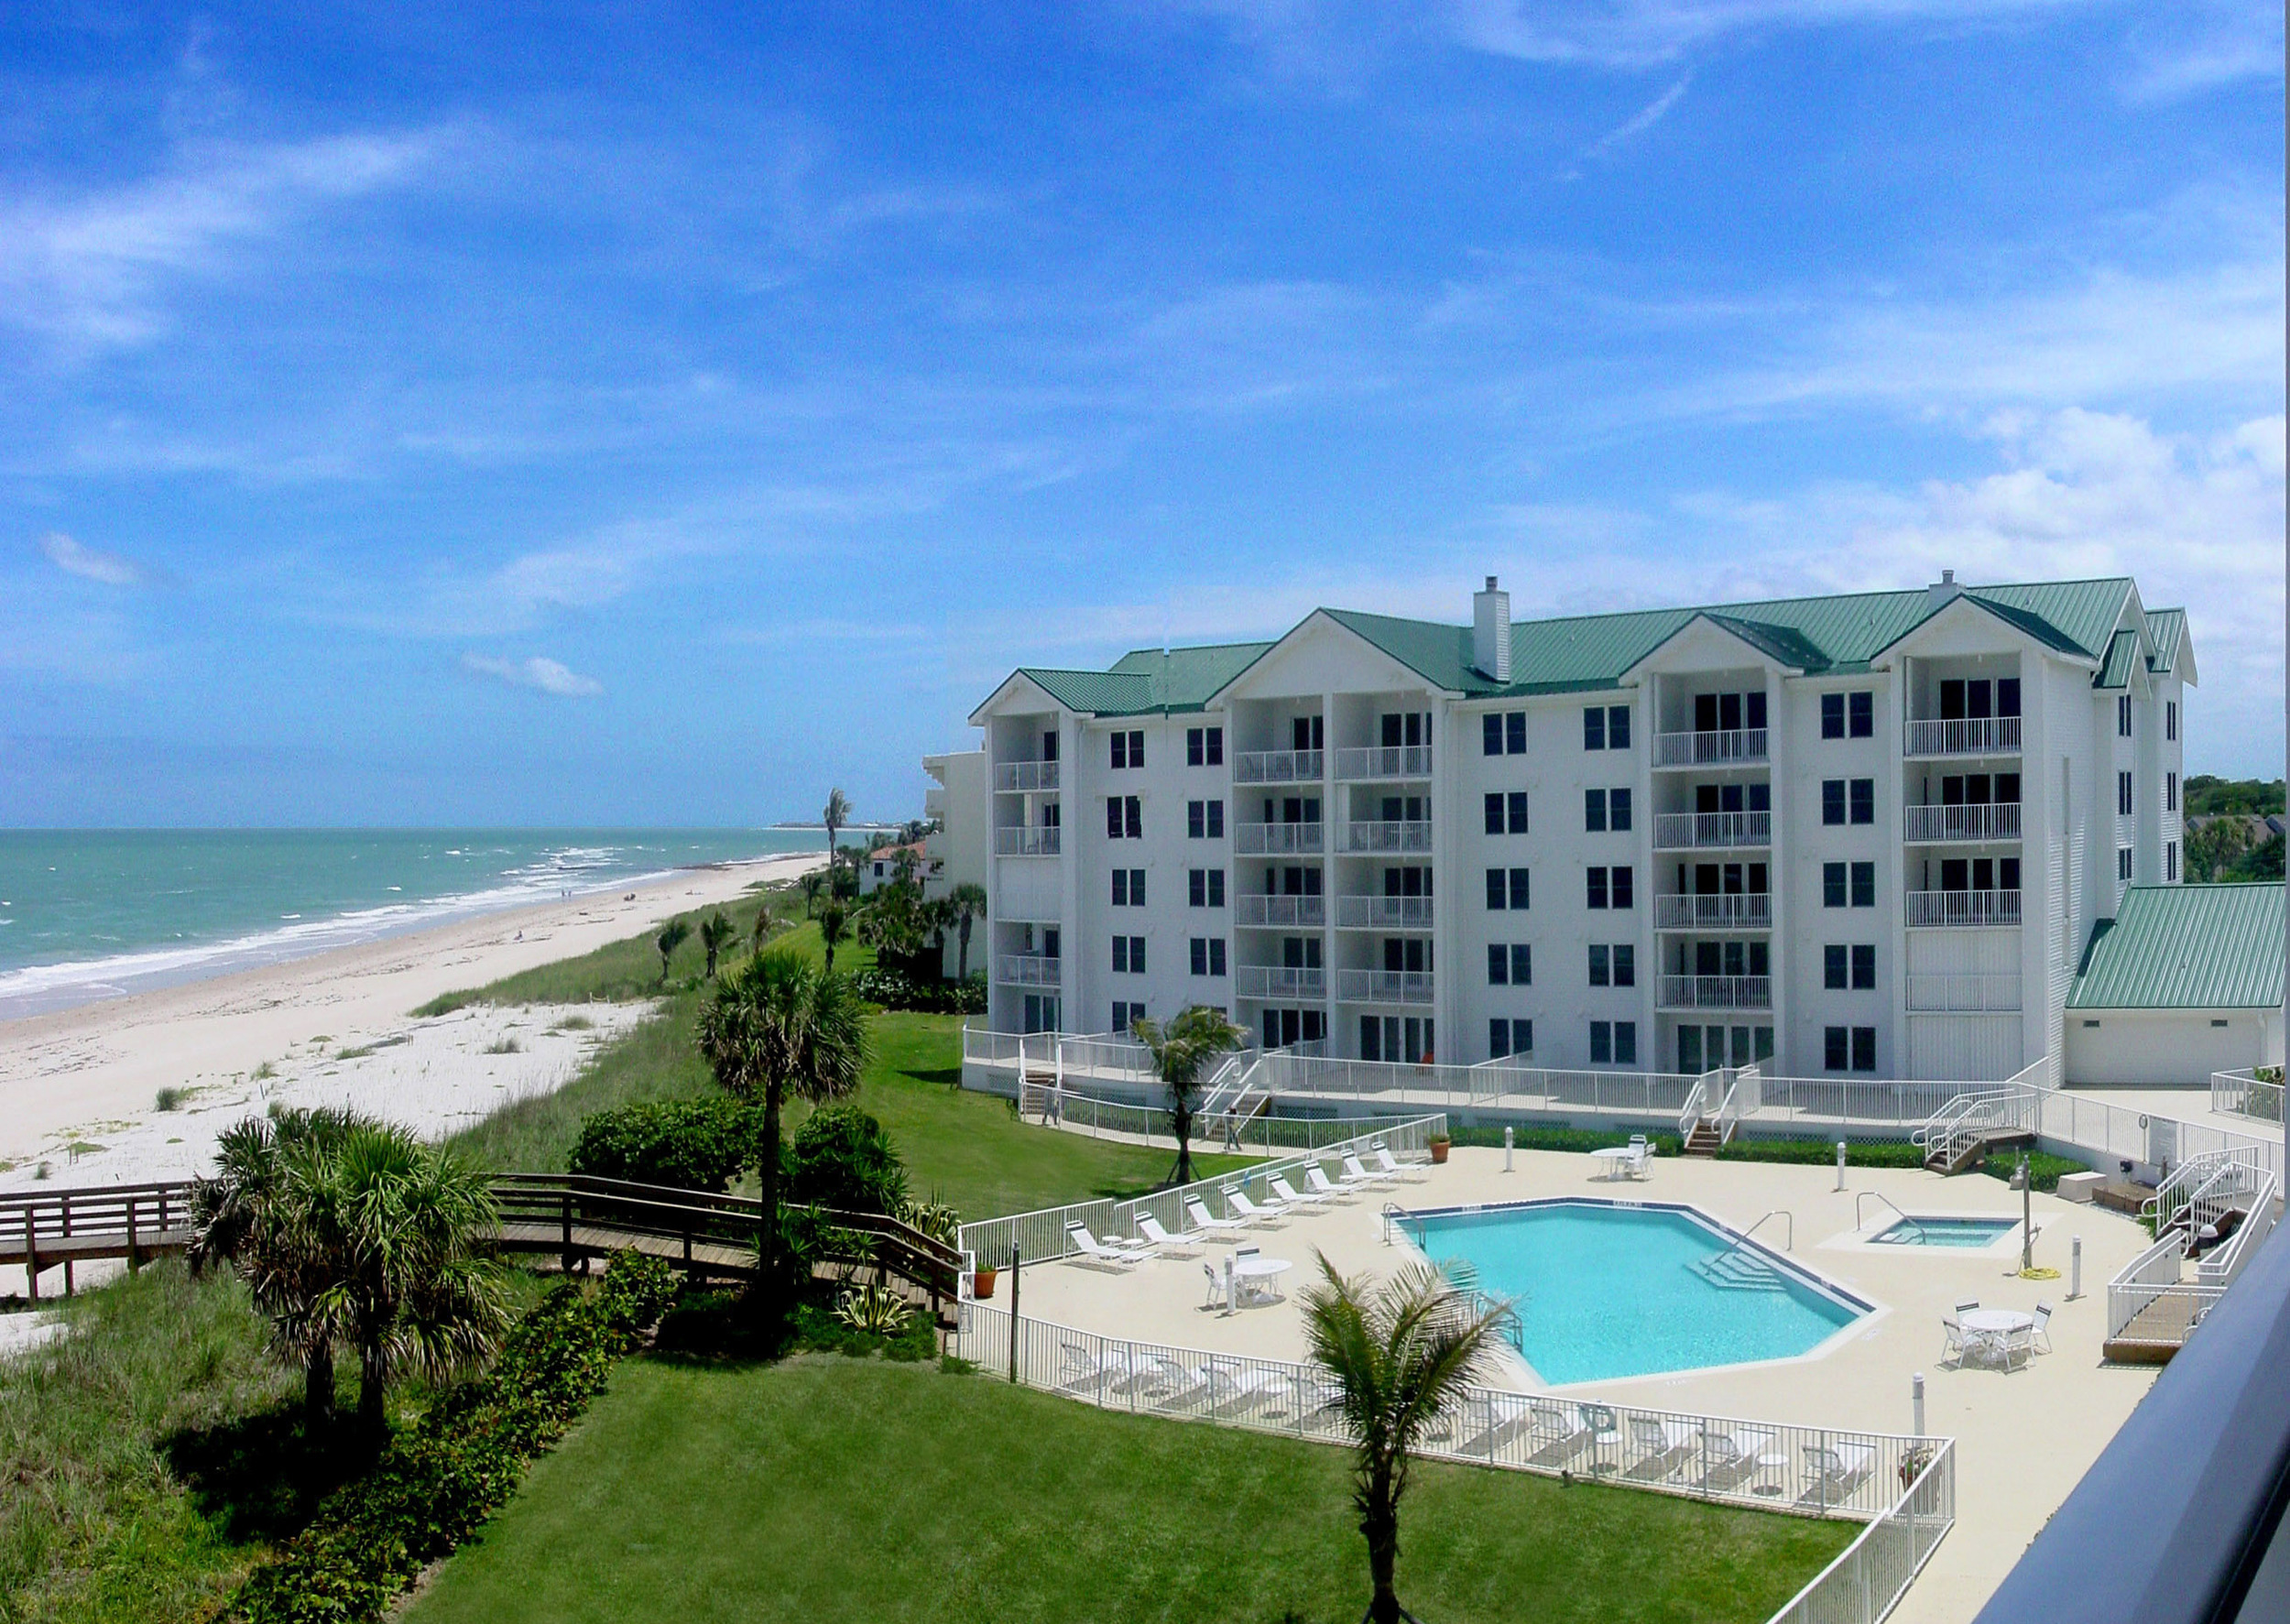 Aerial of the Gables oceanfront condo and pool